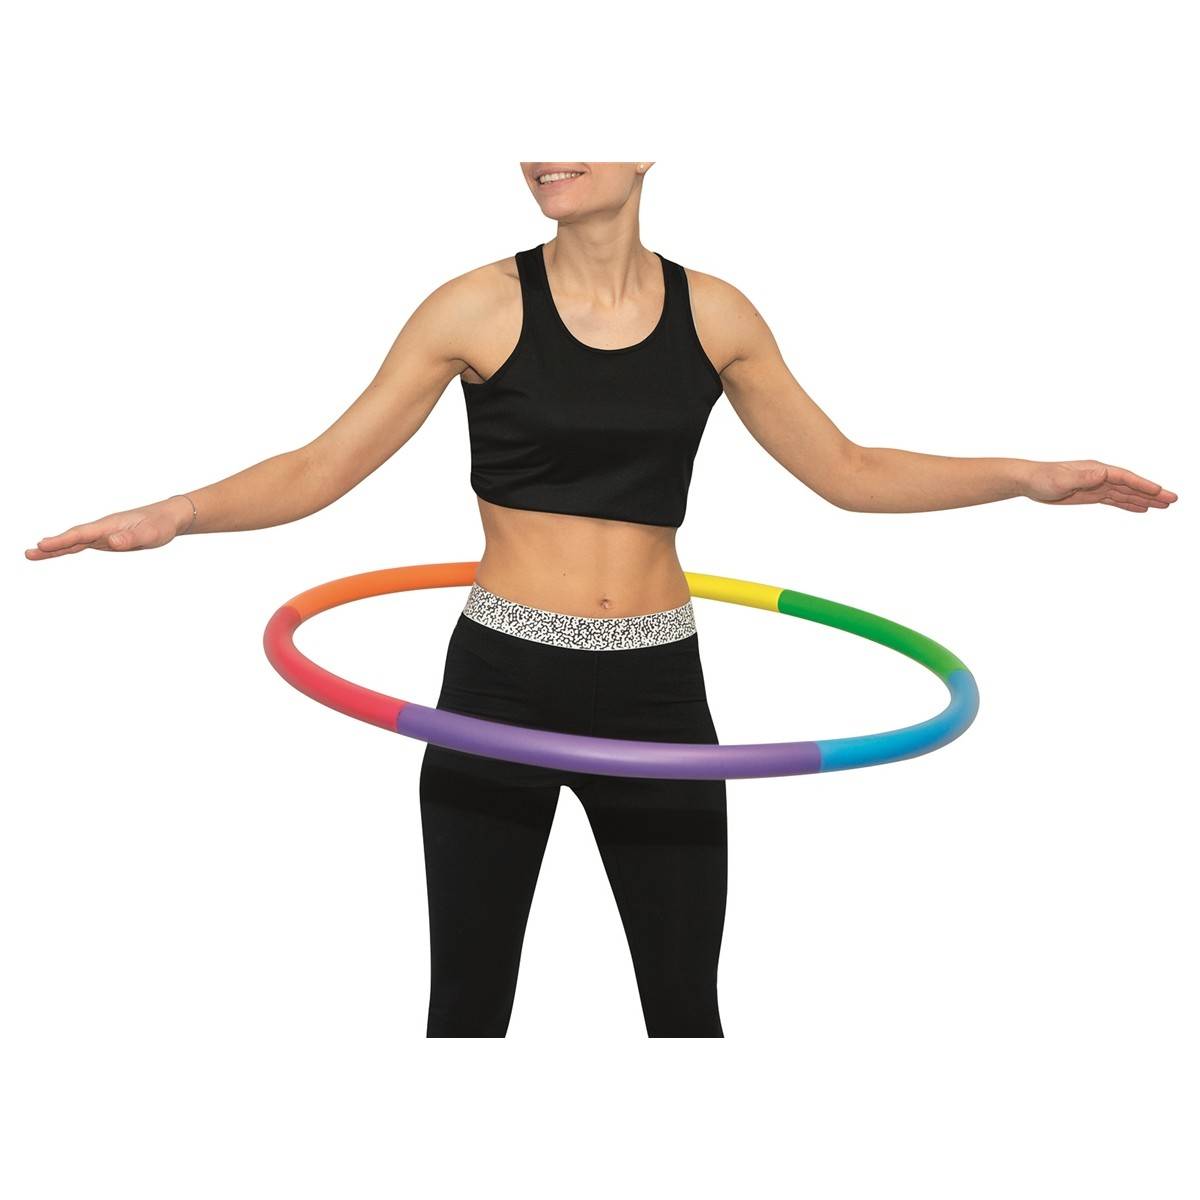 where can i find a weighted hula hoop